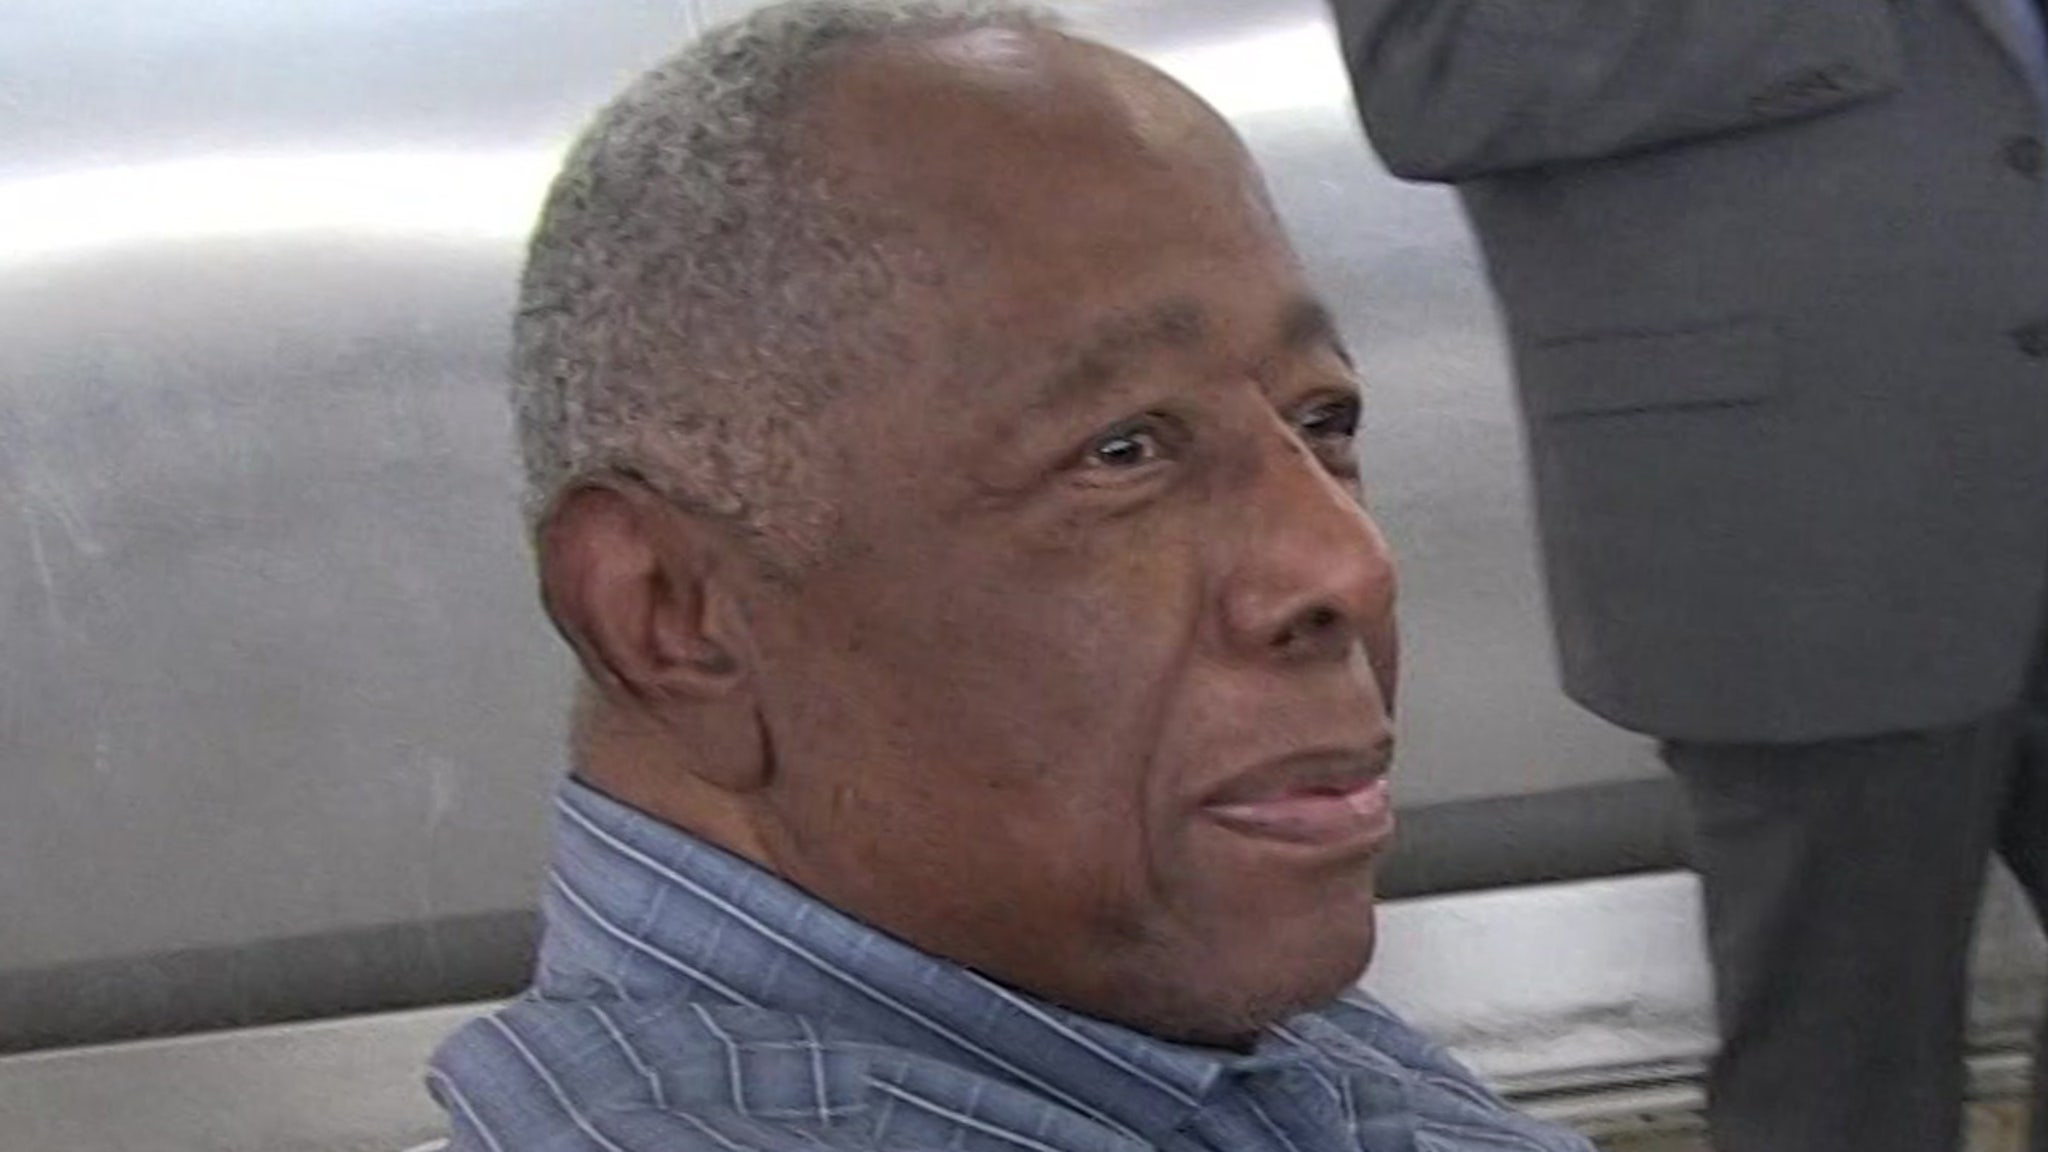 Hank Aaron died of natural causes, the COVID-19 vaccine is not a factor, authorities believe